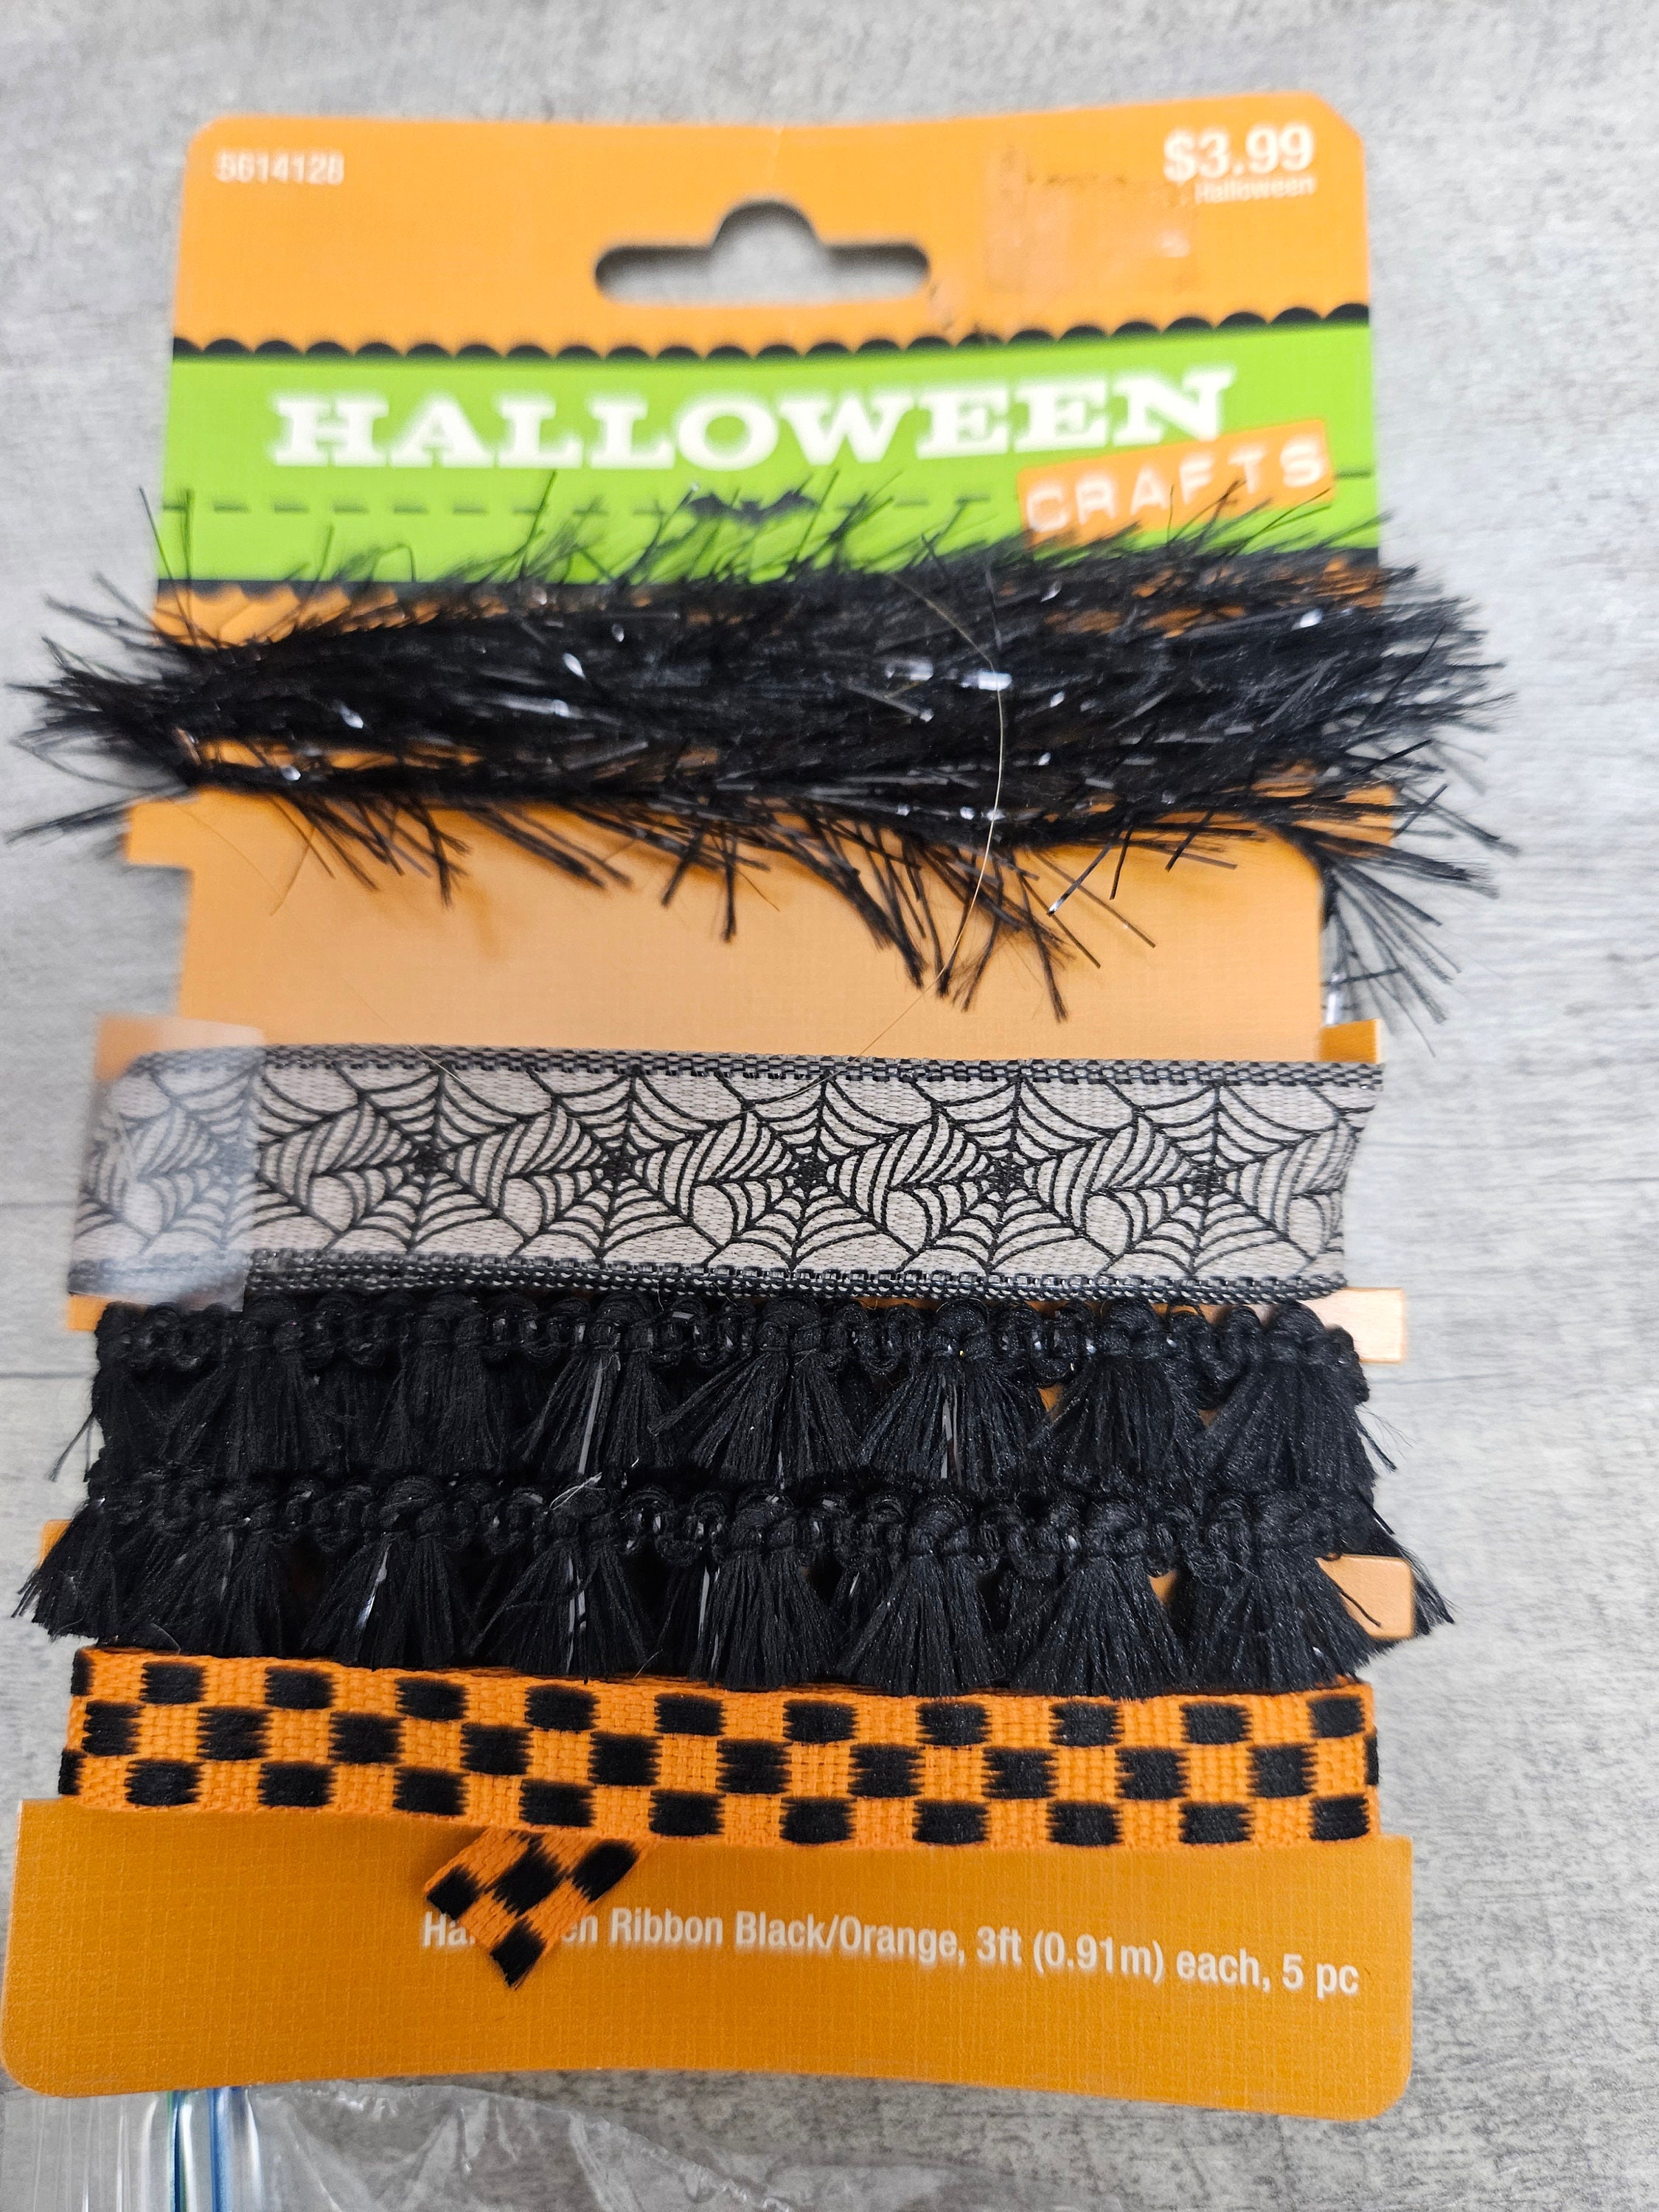 Mixed Lot of Arts & Crafts Supplies Halloween Ribbon Clamps 